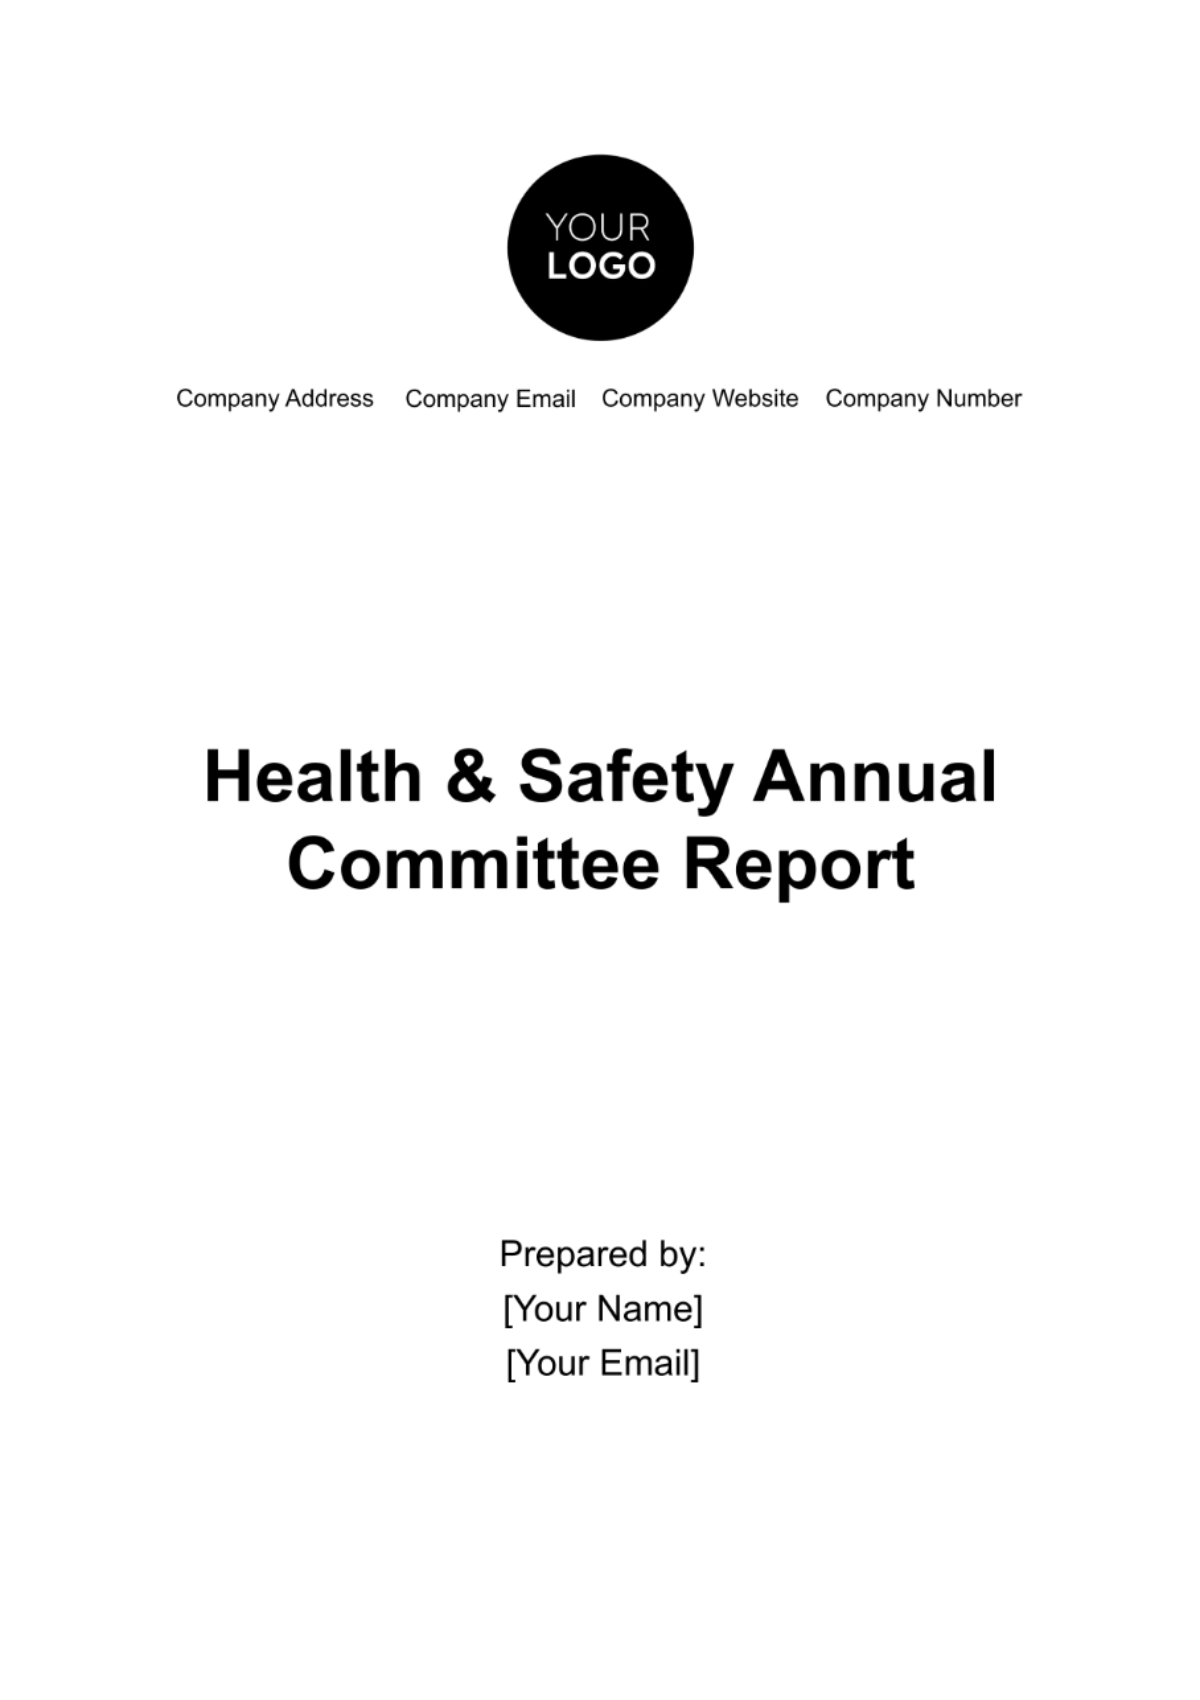 Free Health & Safety Annual Committee Report Template